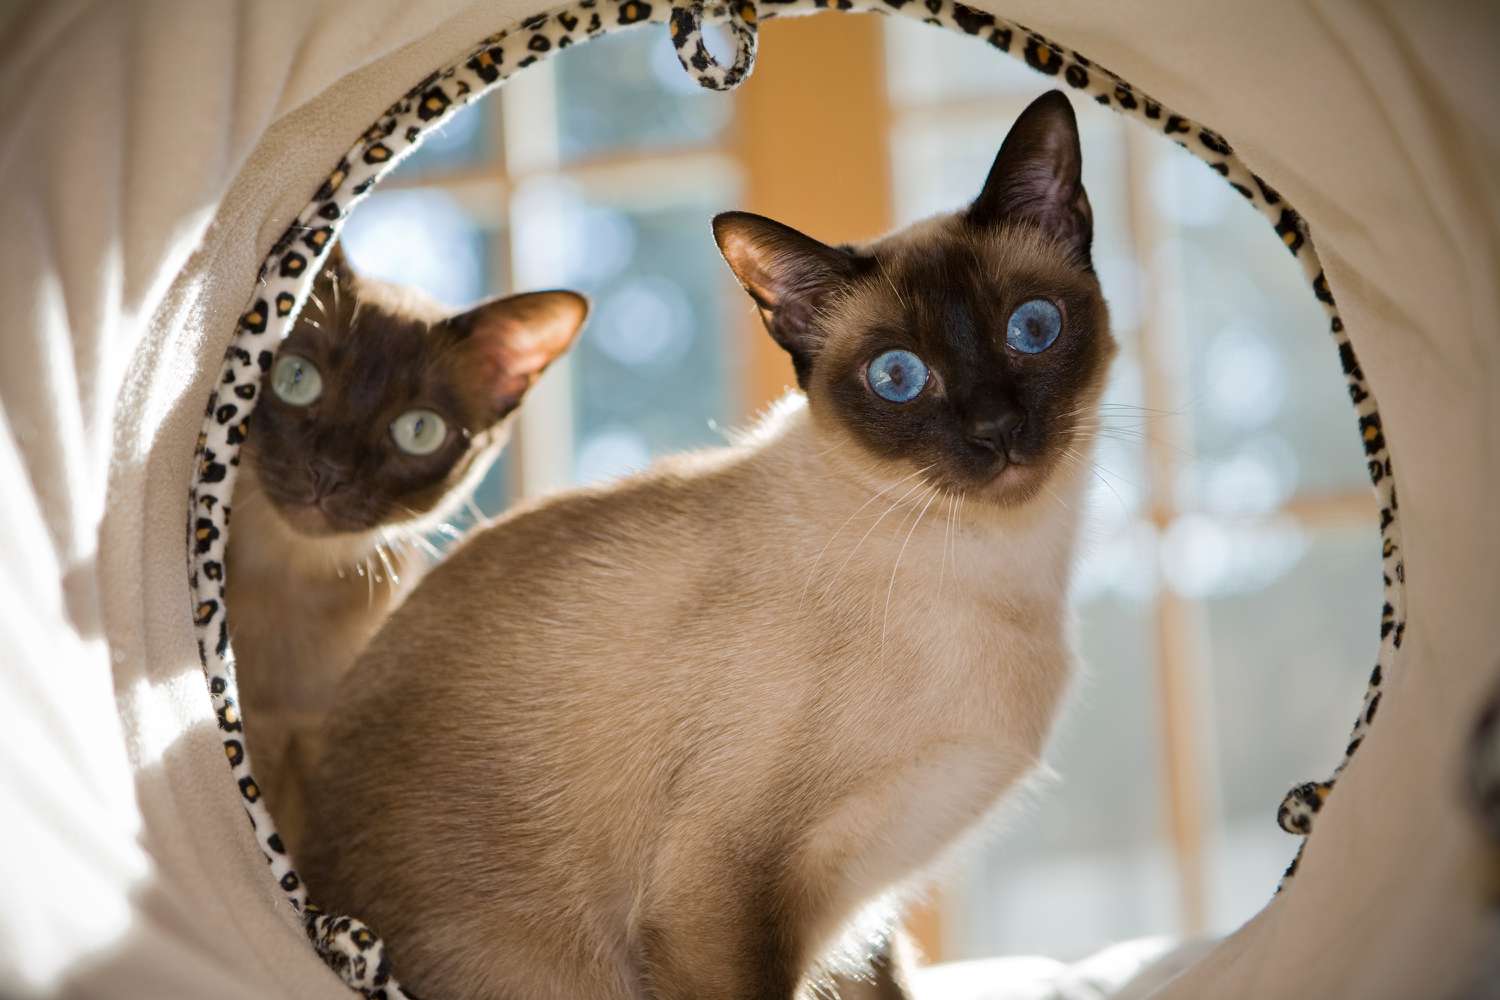 Tonkinese Cats in a Laundry Barrel